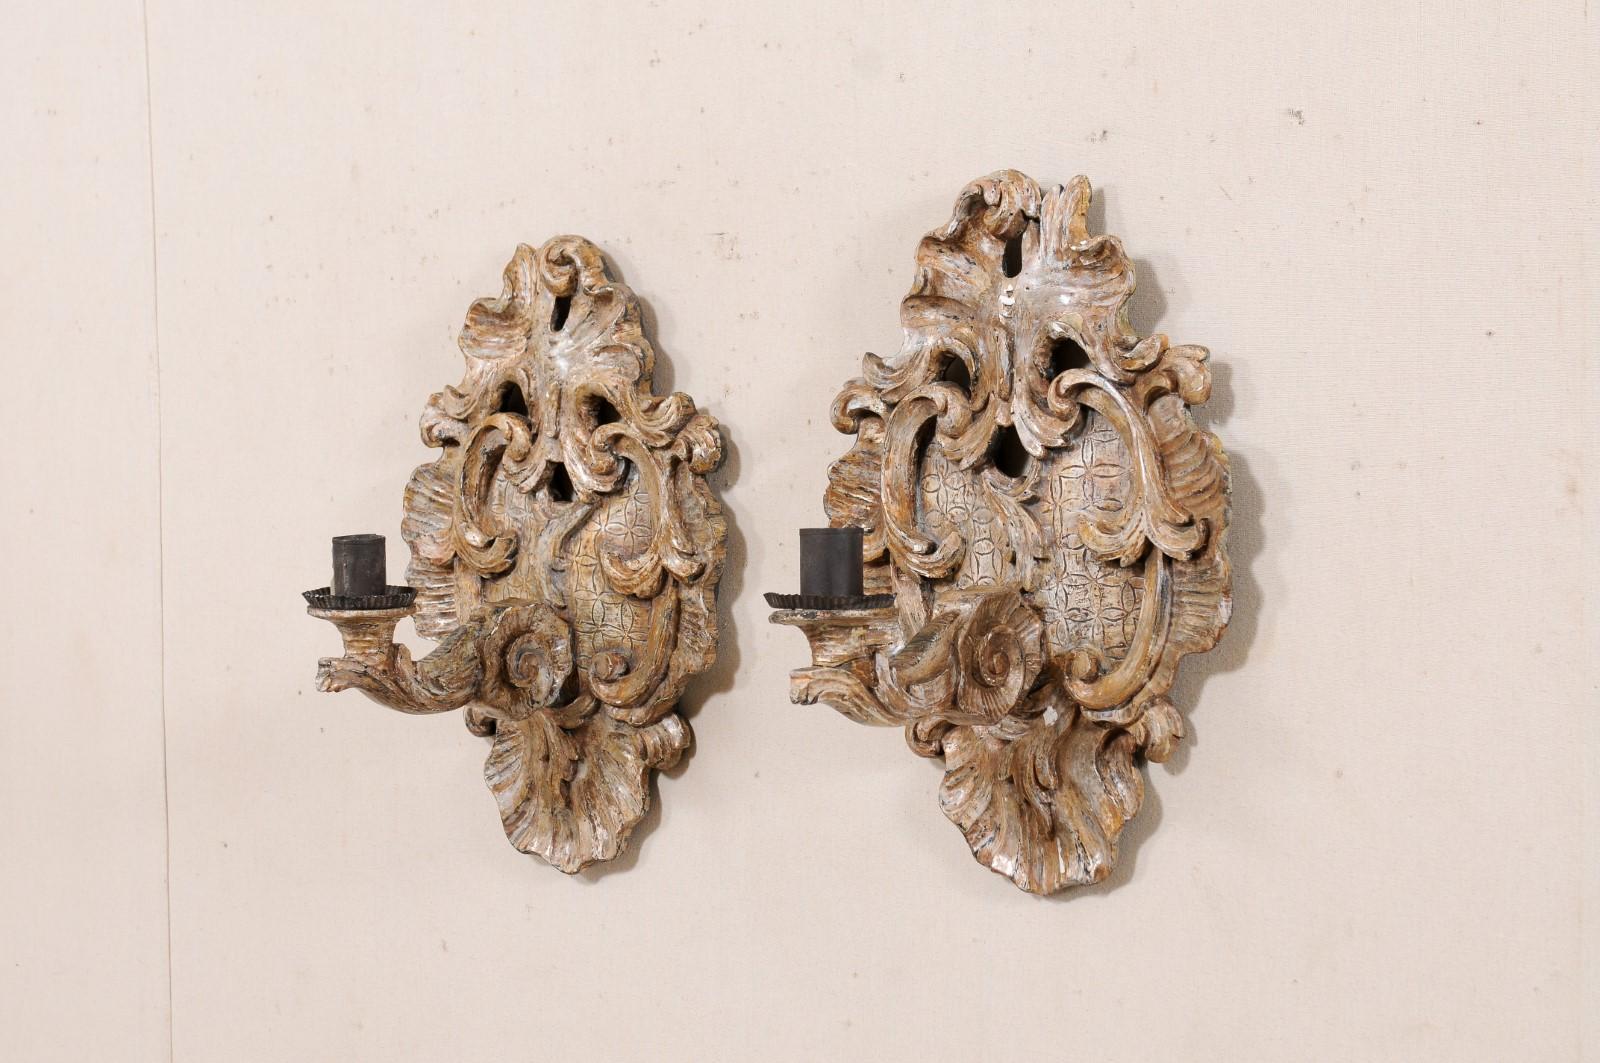 Italian Antique Pair of Acanthus Leaf-Carved Single-Candle Wall Sconces from Italy For Sale